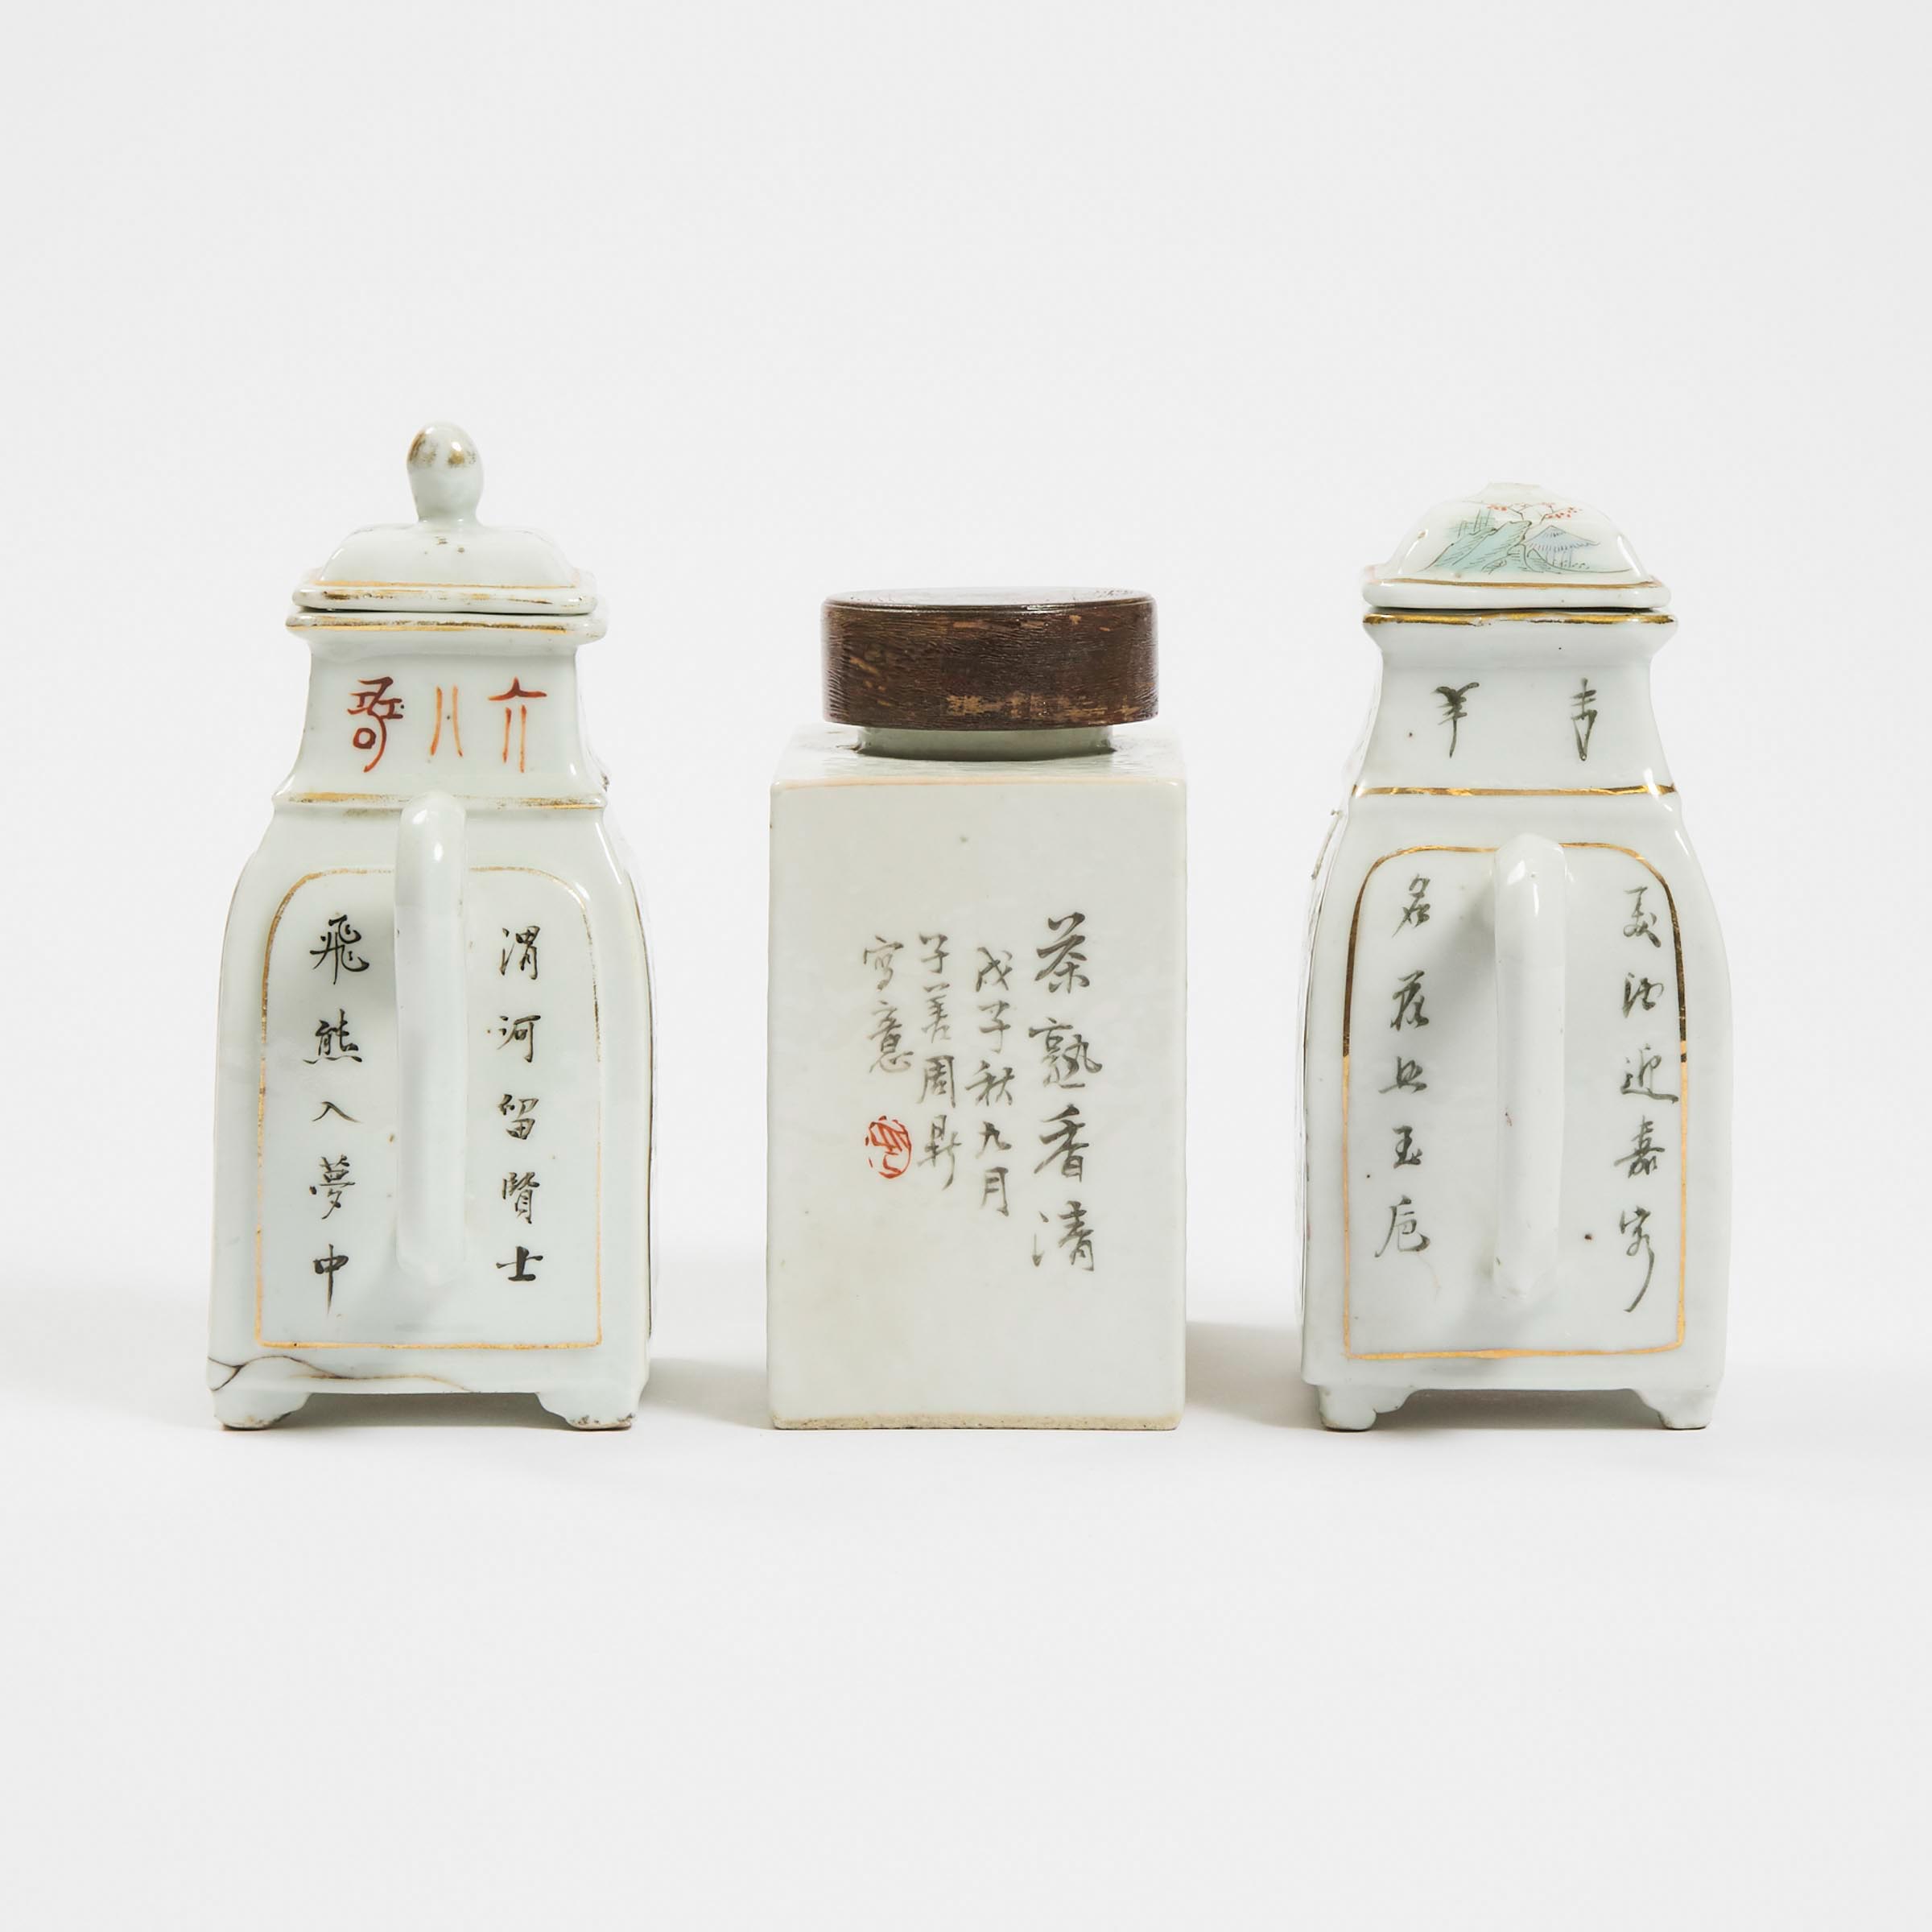 A Pair of Famille Rose Square-Form Teapots, Together With a Tea Caddy, Republican Period